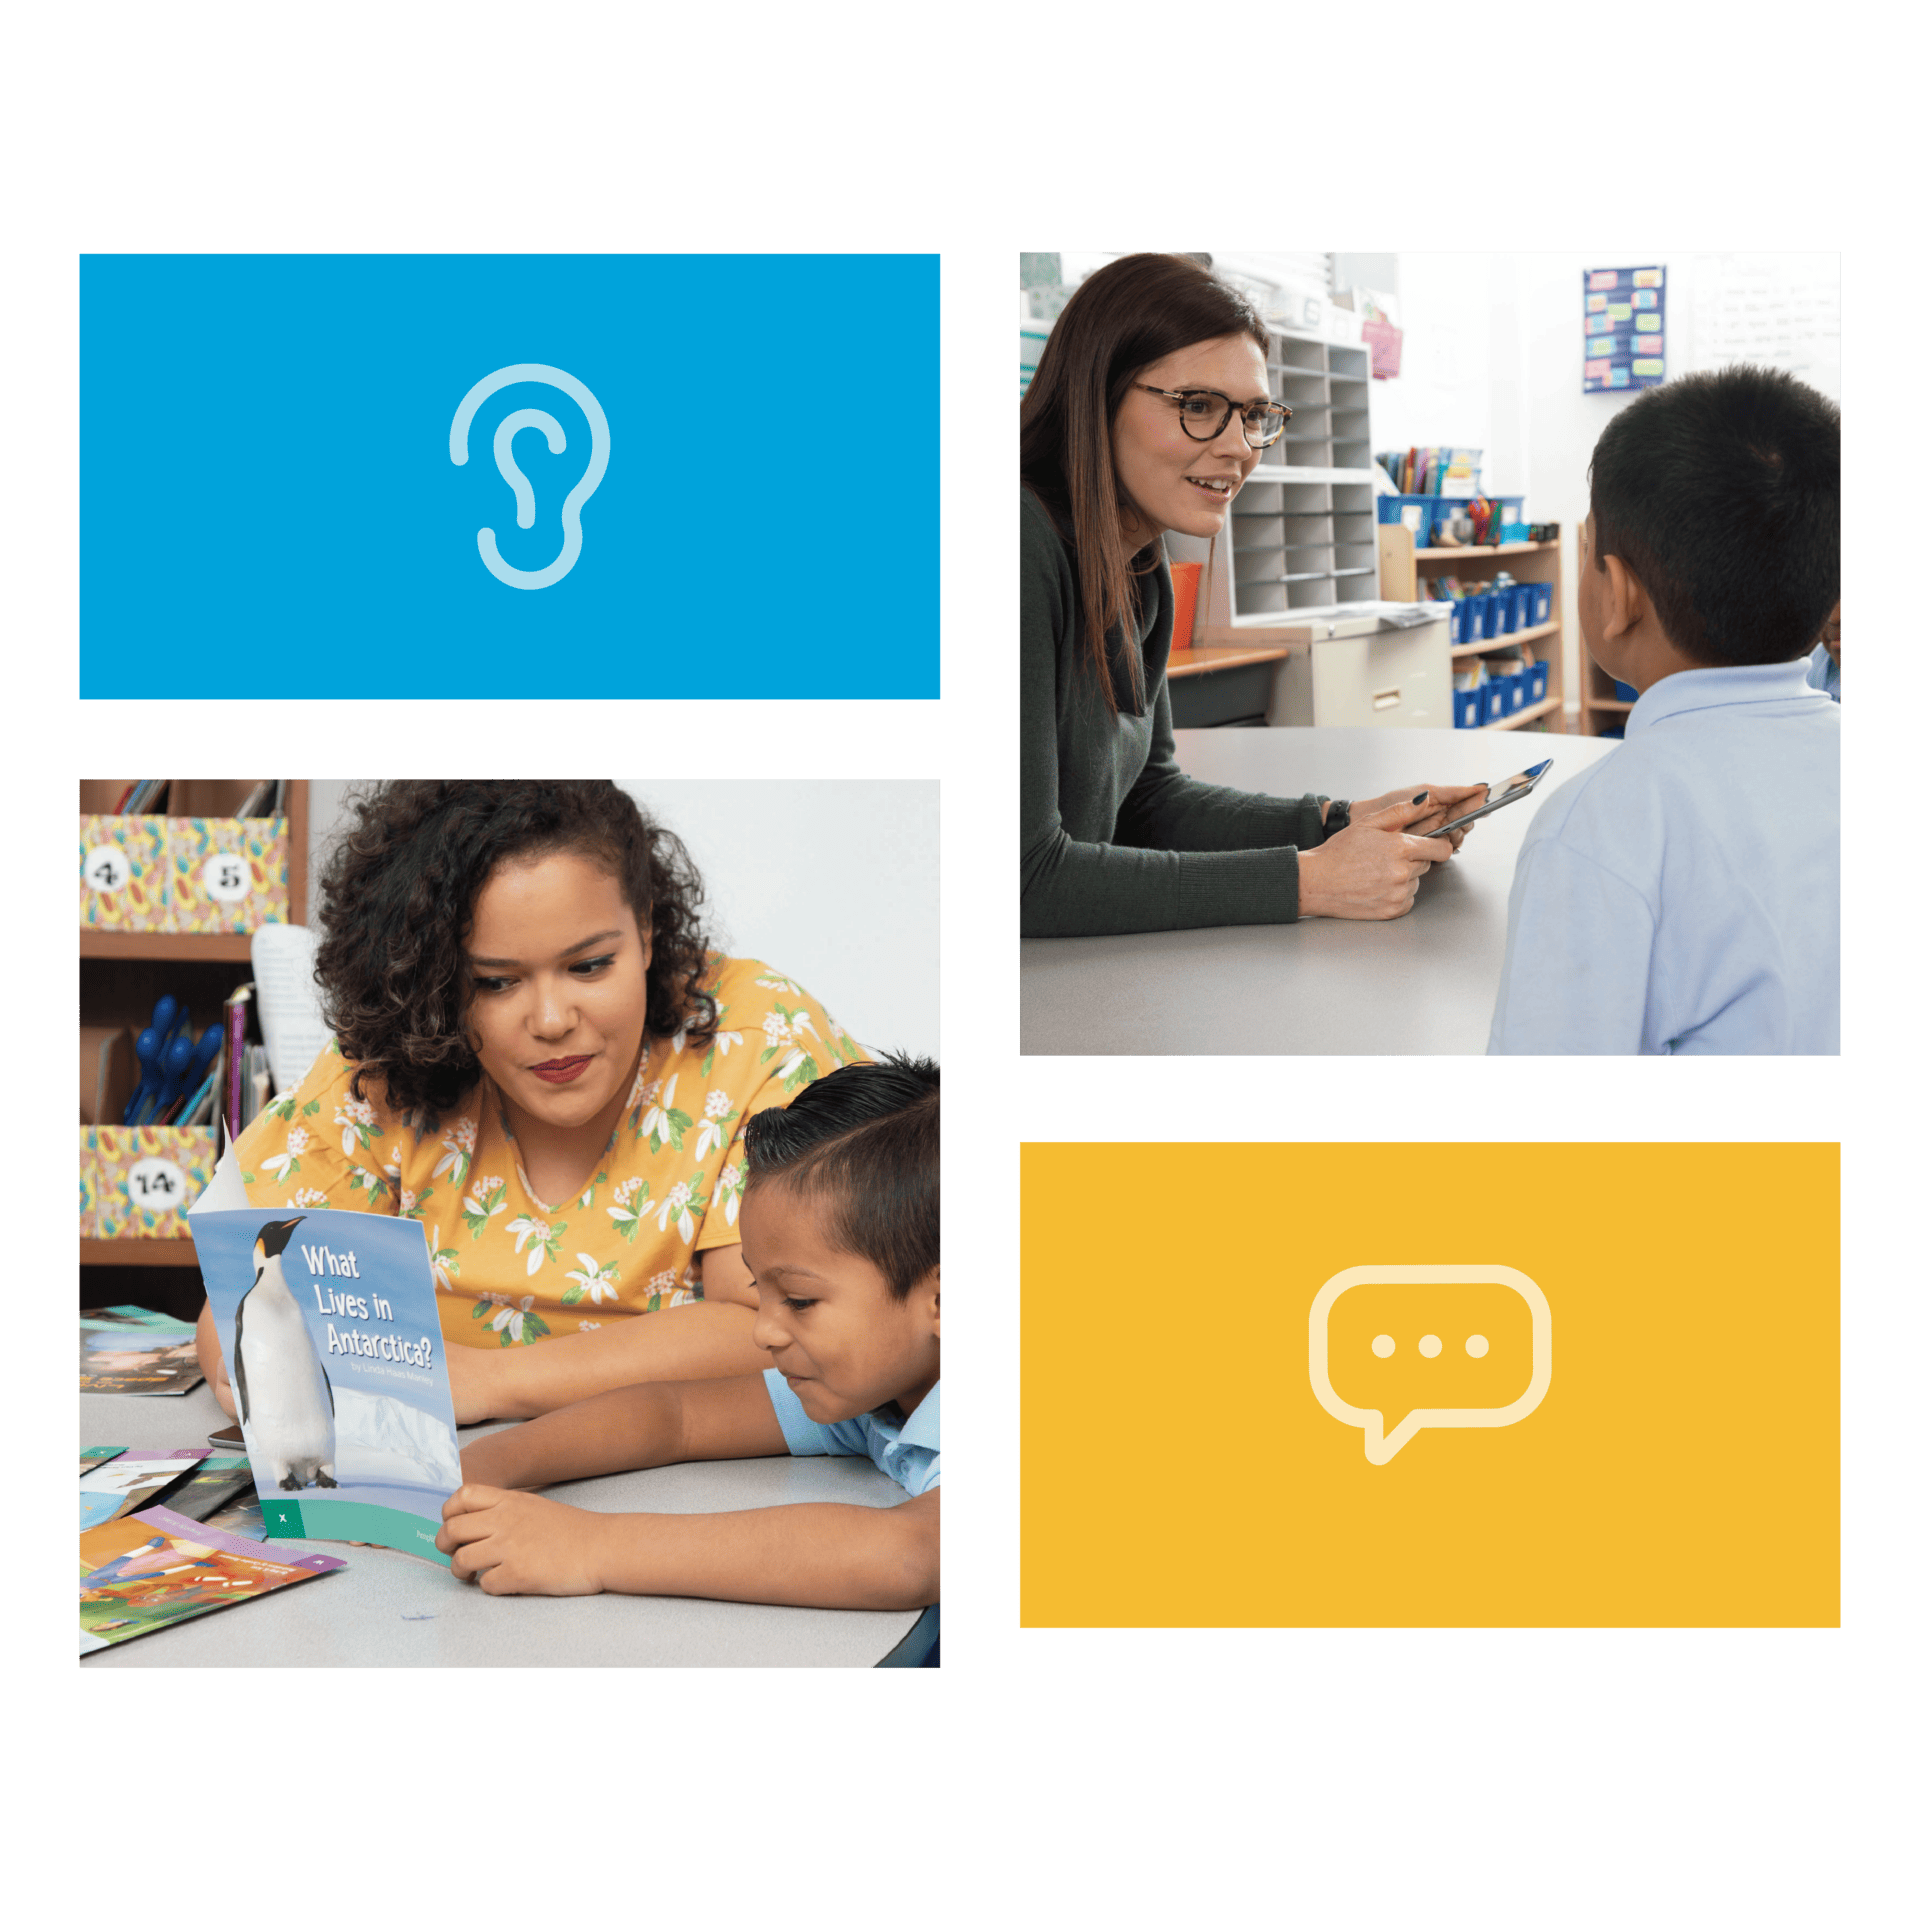 A collage of four images: a blue logo with an ear symbol, a teacher speaking to a student, a woman reading to two children, and a yellow background with a speech bubble icon.